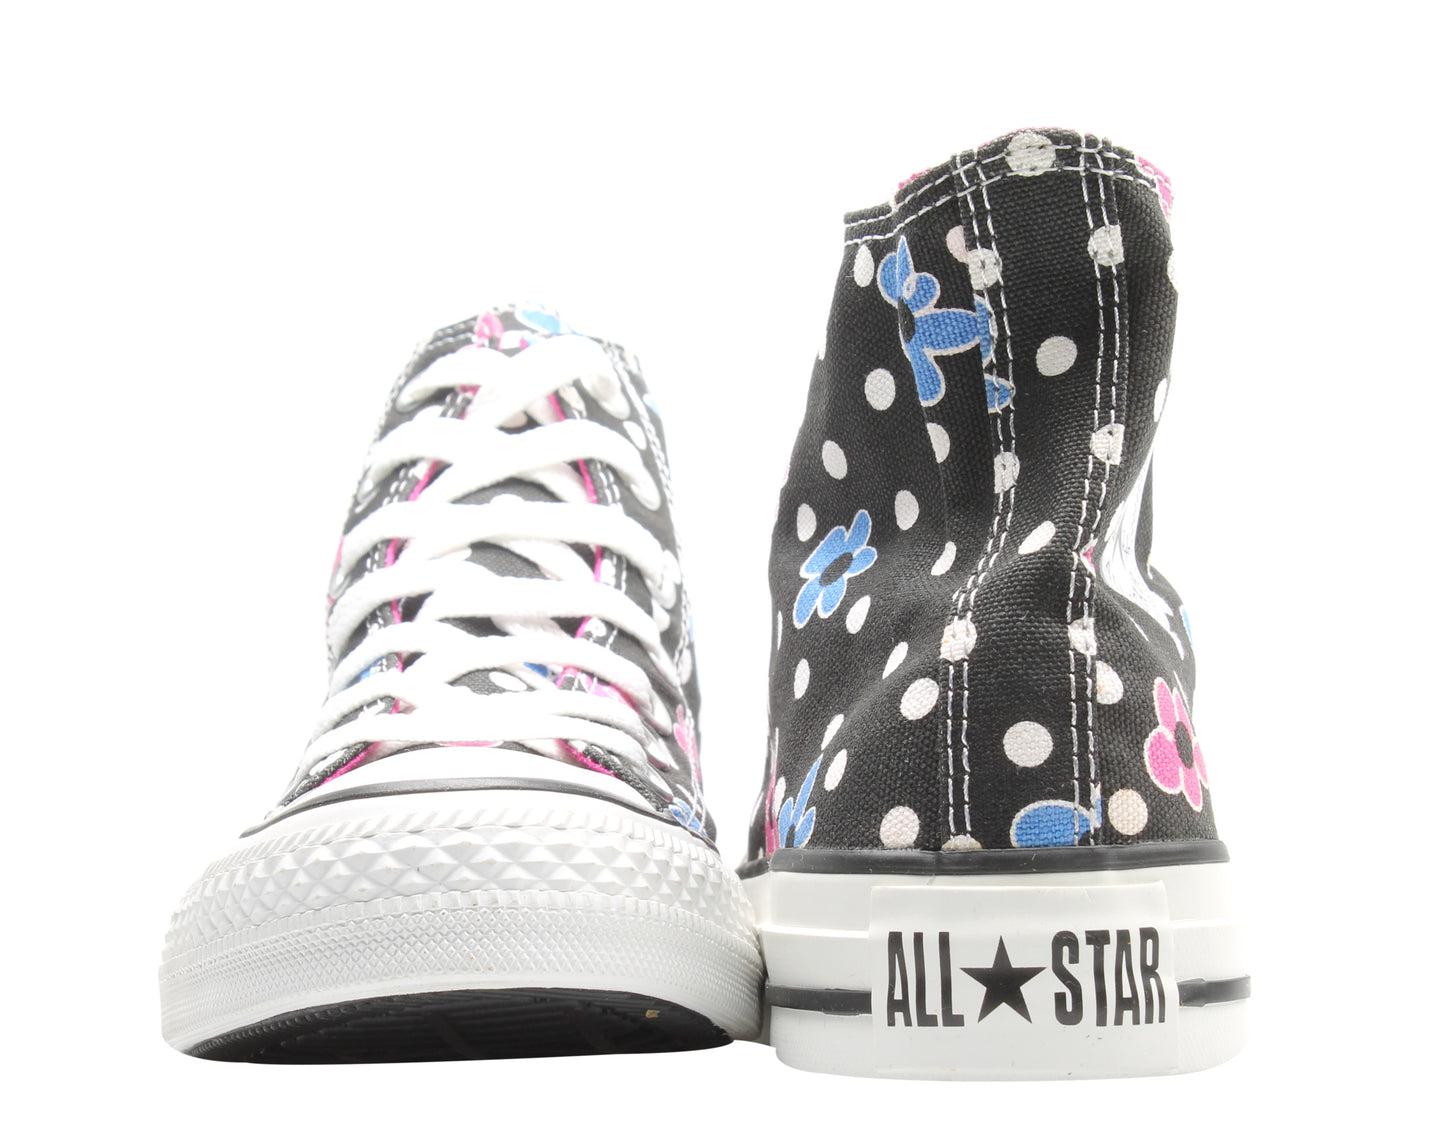 Converse Chuck Taylor All Star Print Flower-Dots Black/Multi High Top Sneakers 517452